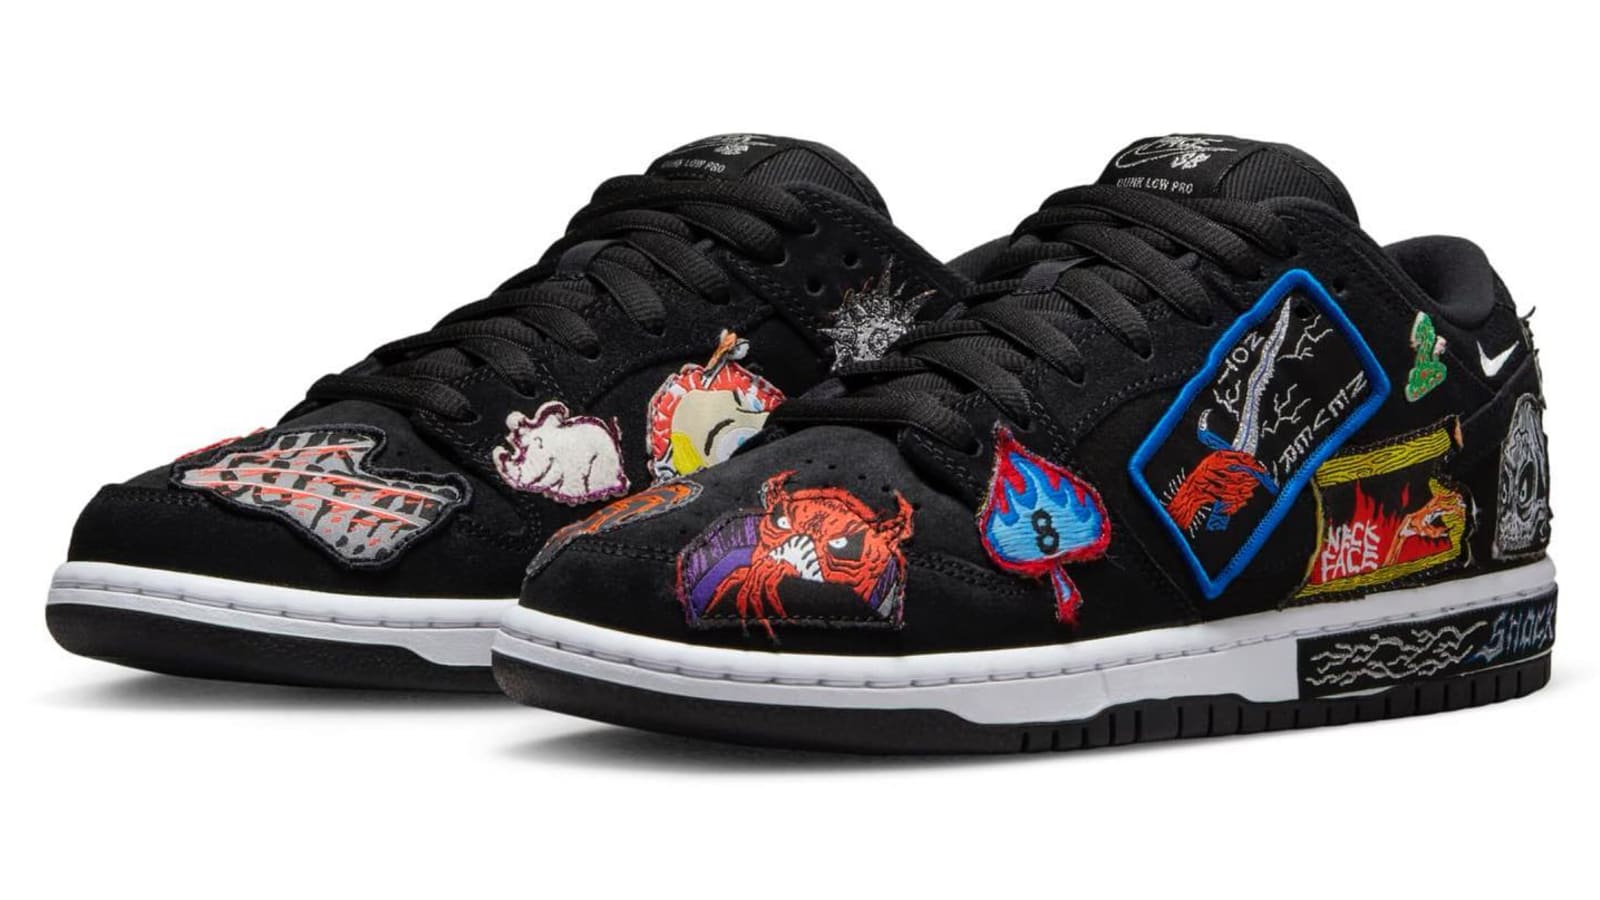 Neckface x Nike SB Dunk Low DQ4488 001 Lateral